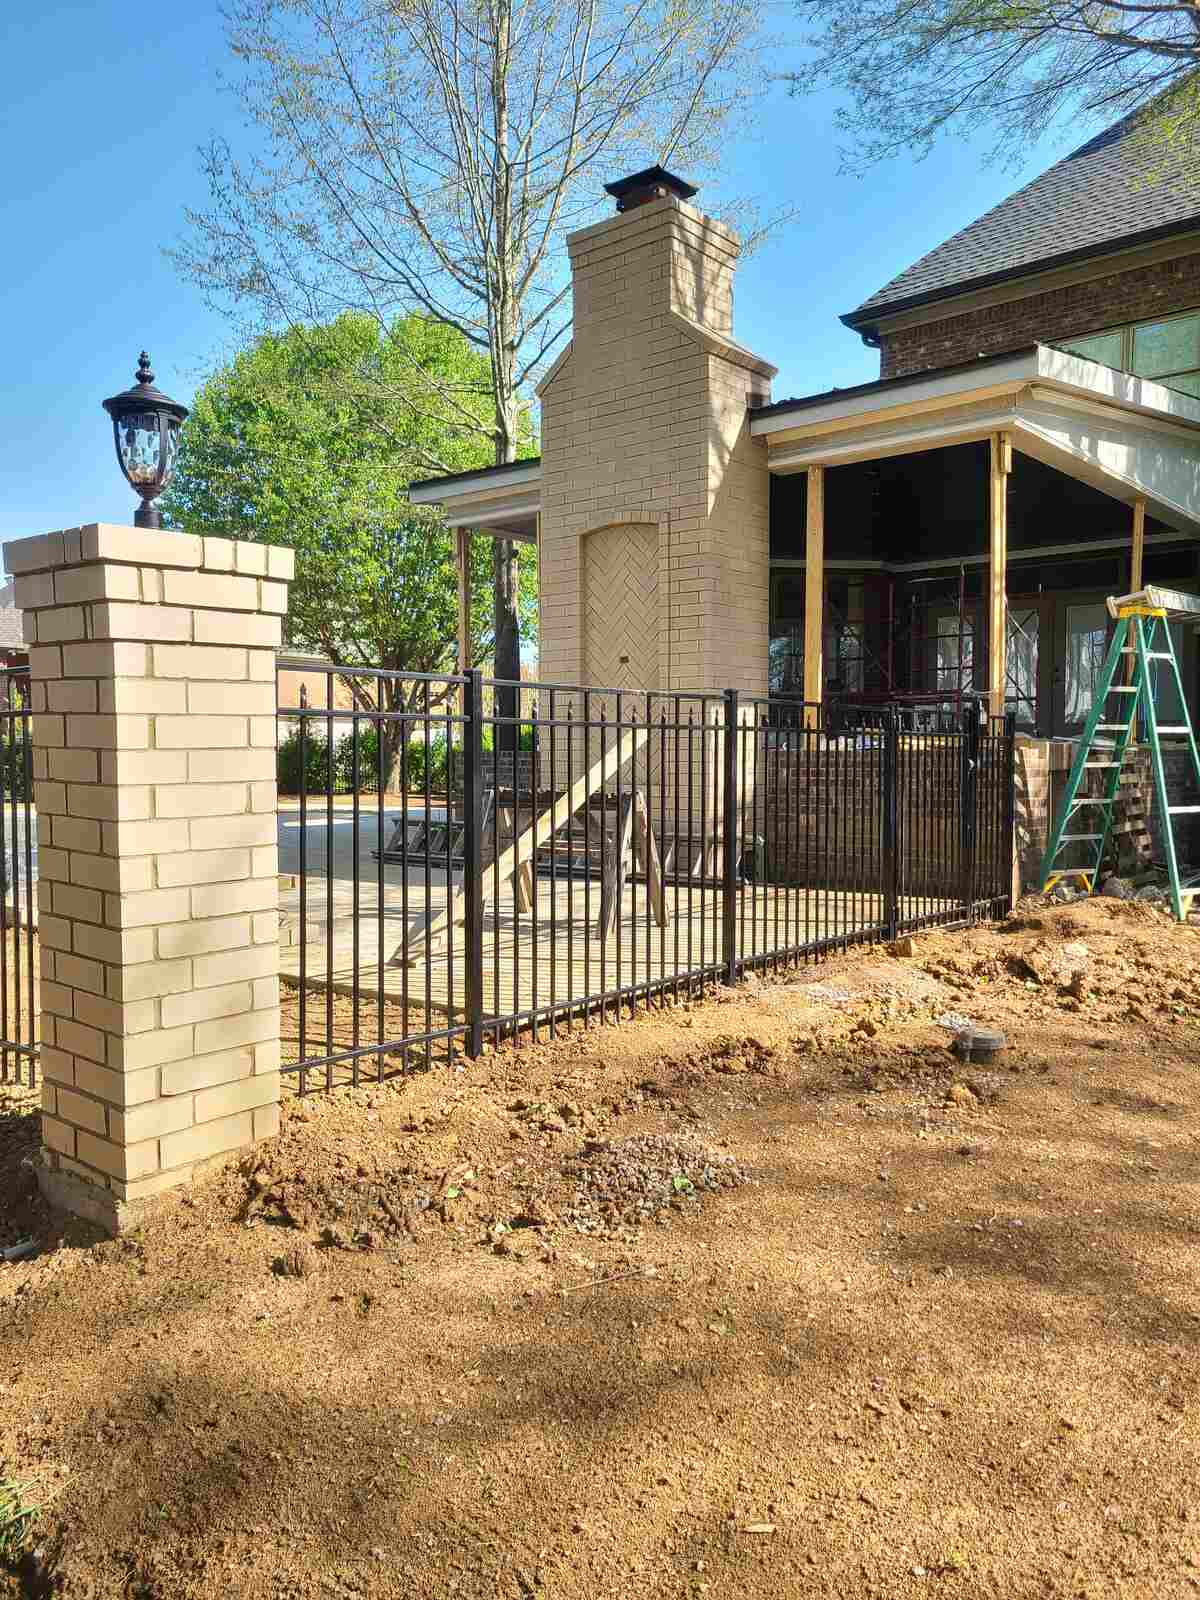 Black aluminum pool fence installed by Master Fence in Murfreesboro, TN